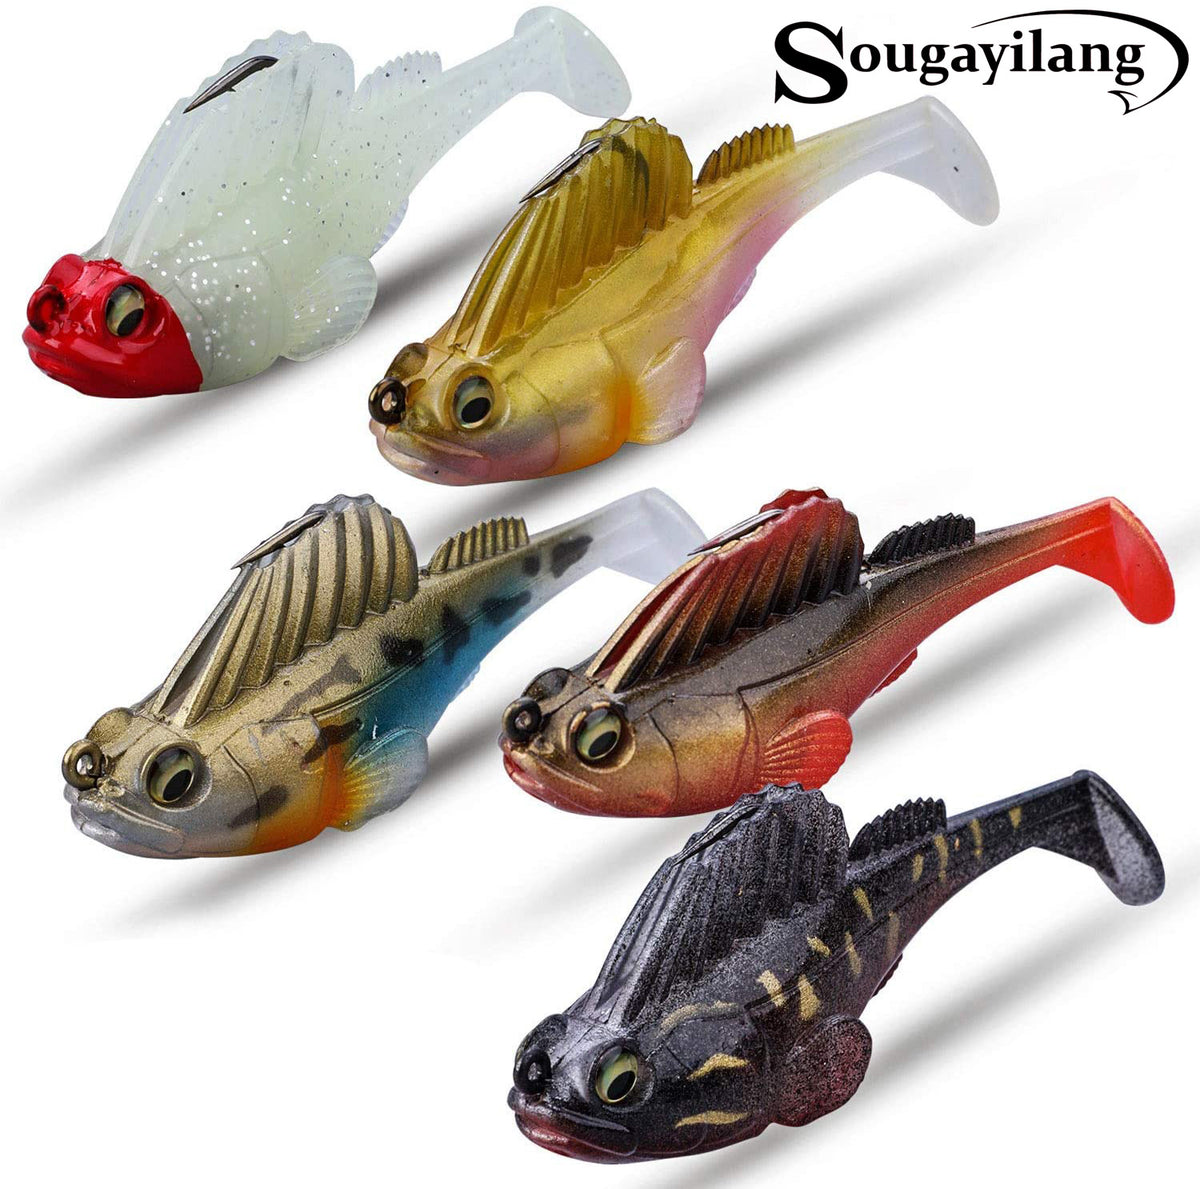 Roll over image to zoom in Sougayilang Fishing Lures for Bass Trout